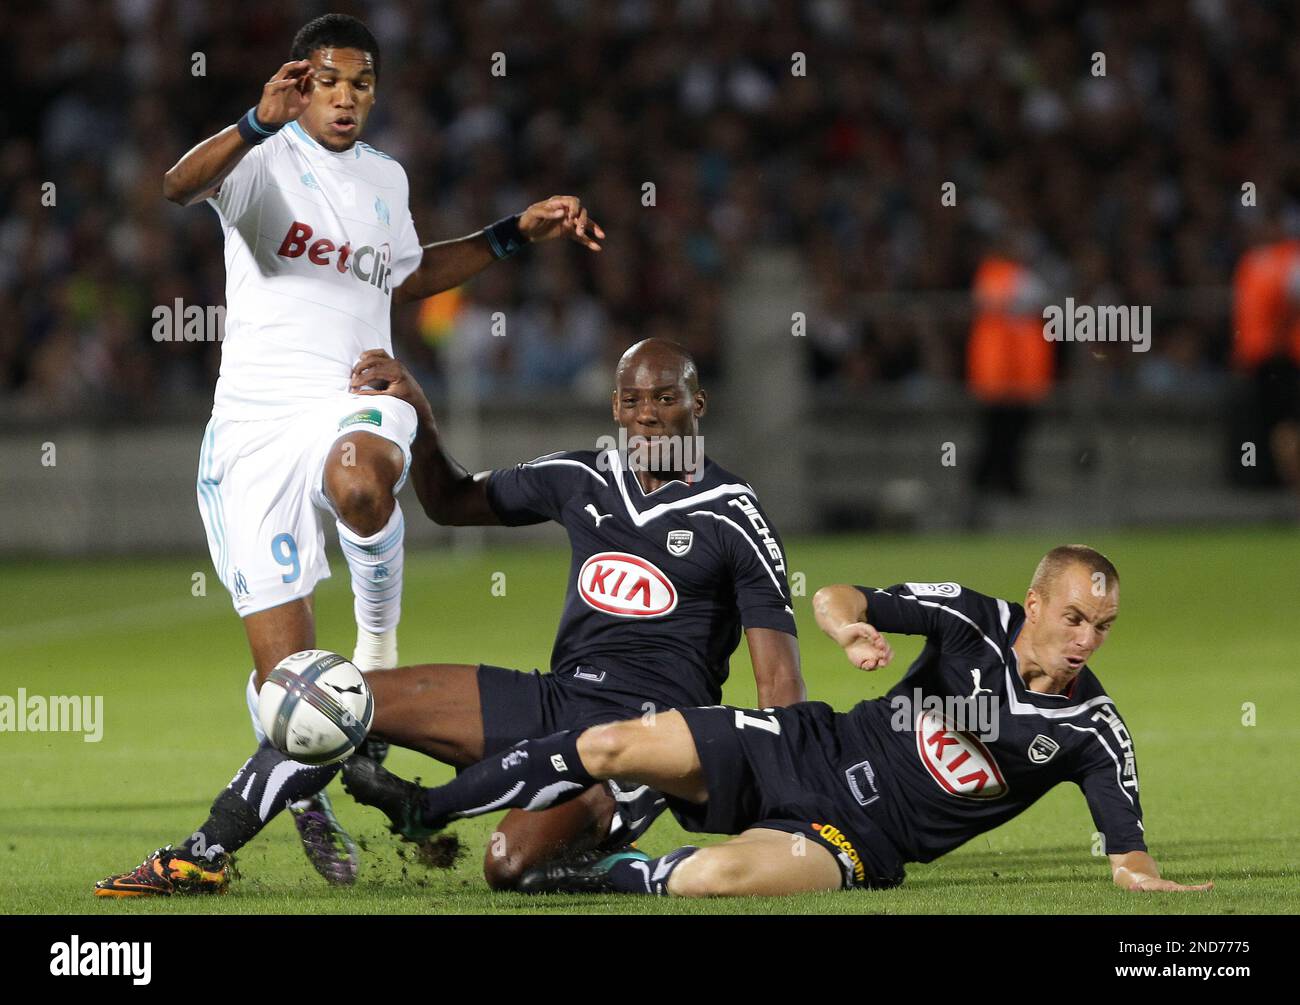 Marseille's Brandao, left, is tackled by Bordeaux's Mathieu Chalme, right,  and Michael Ciani, center, during their French League one soccer match in  Bordeaux, southwestern France, Sunday, Aug. 29, 2010. (AP Photo/Bob Edme